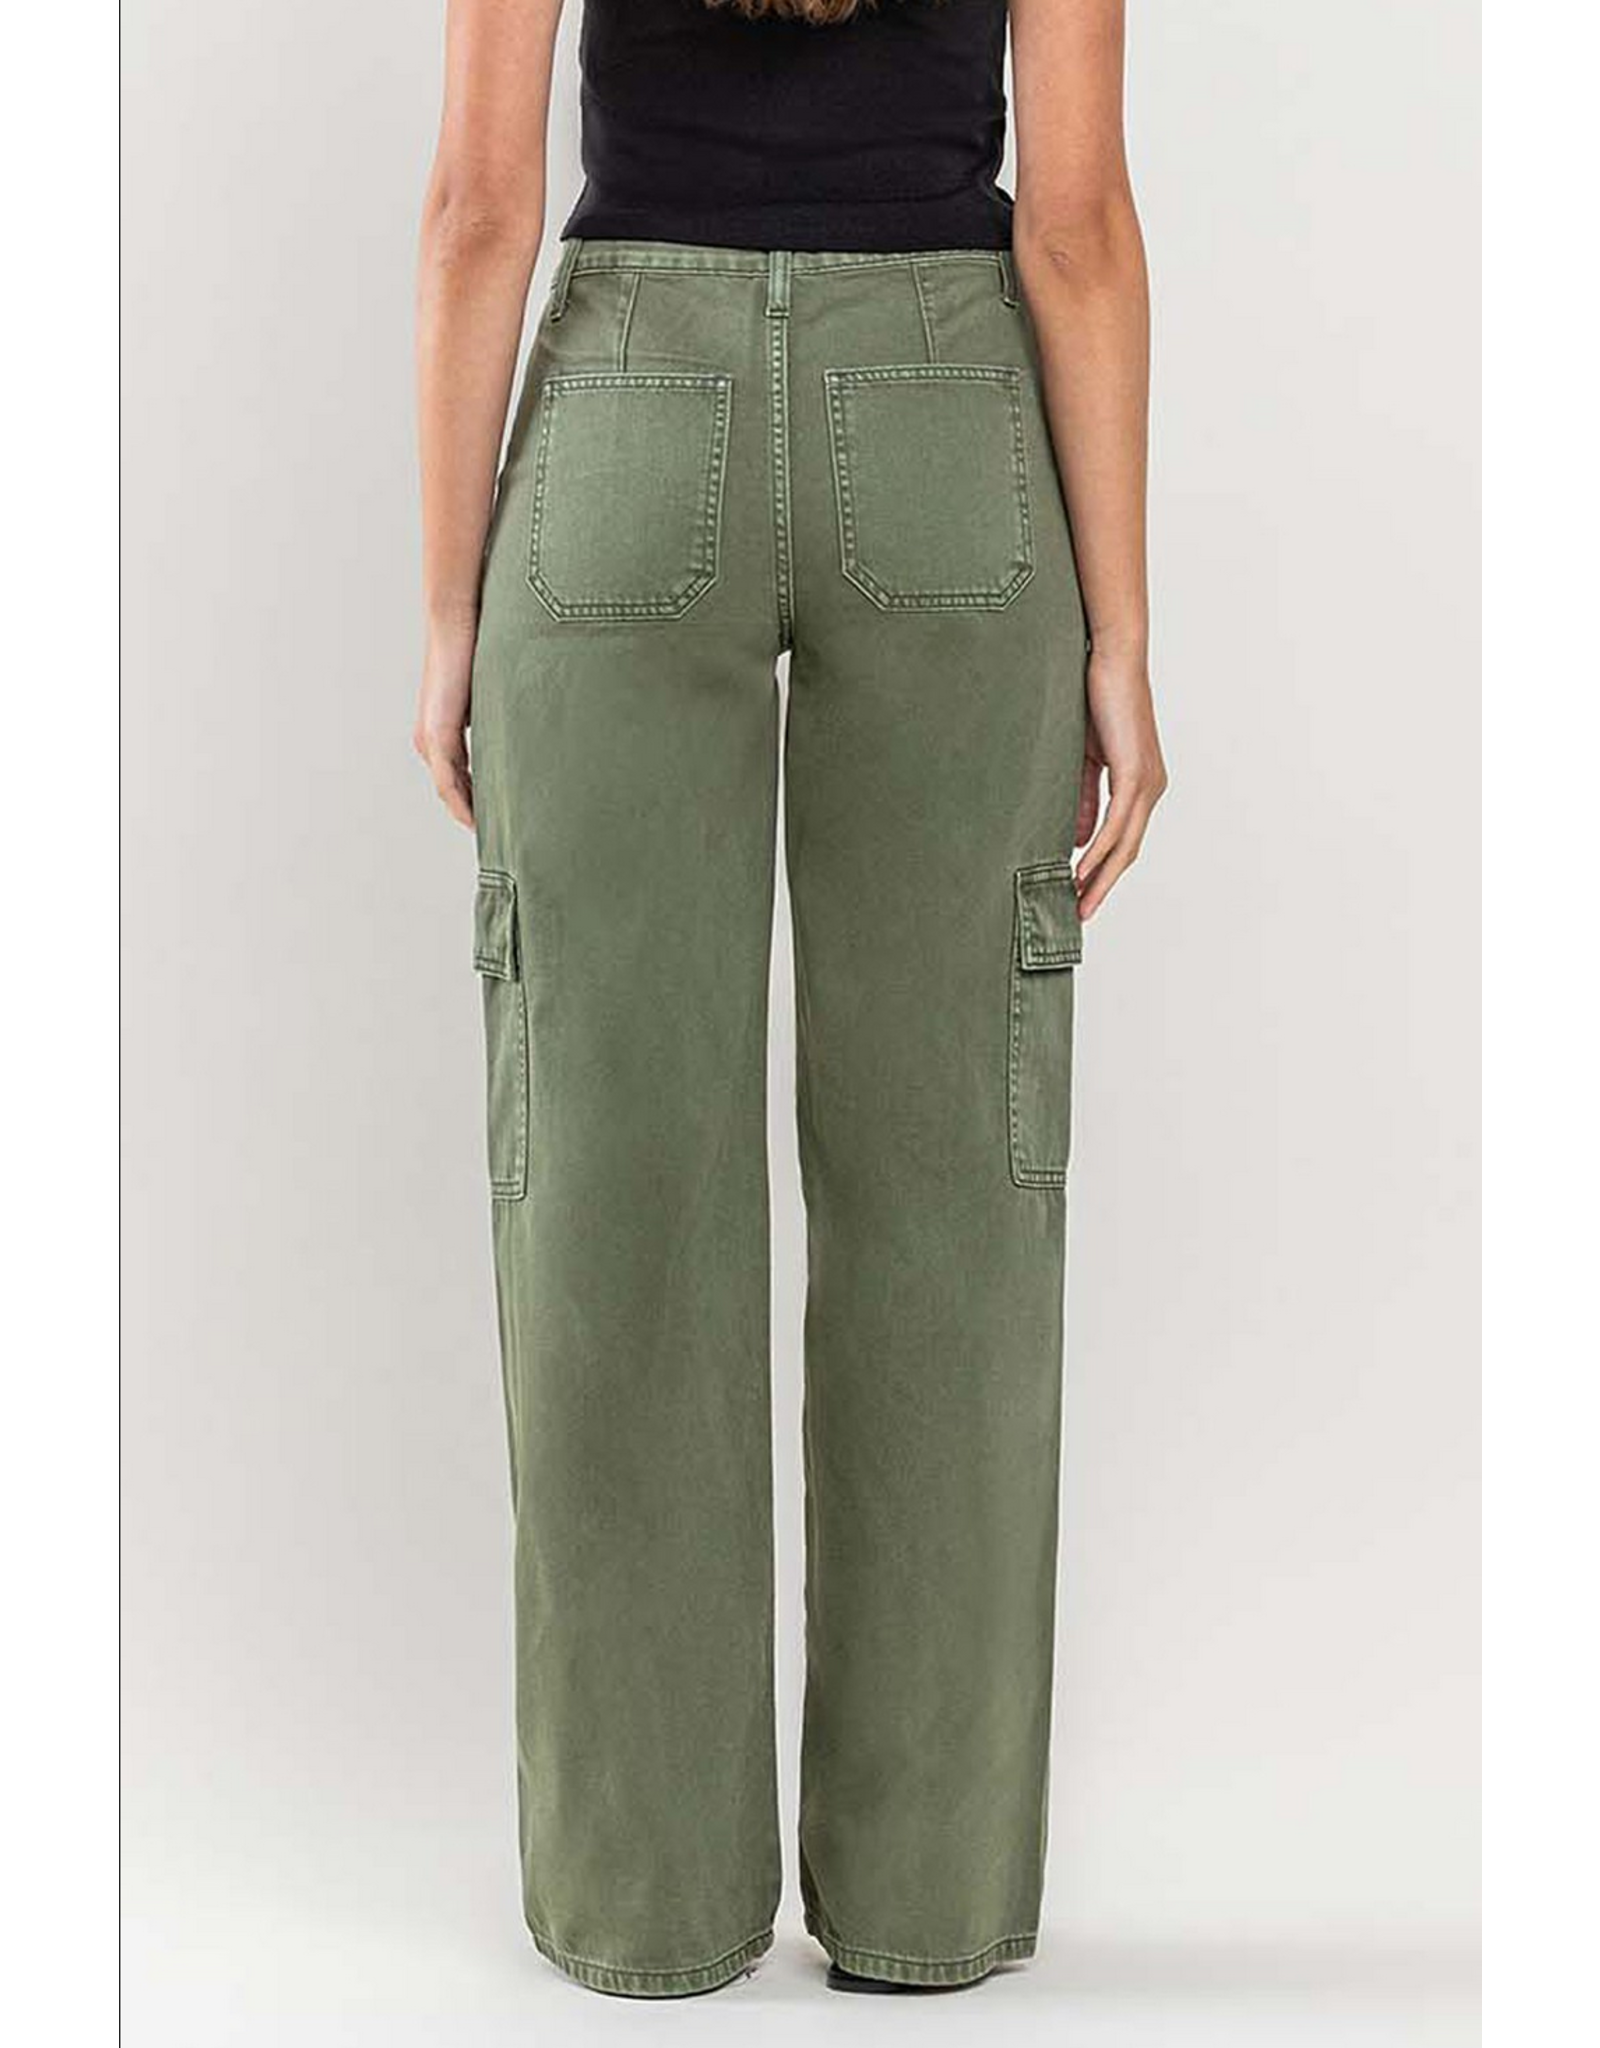  Ownwfeat Cargo Pants Women with Pockets High Waist